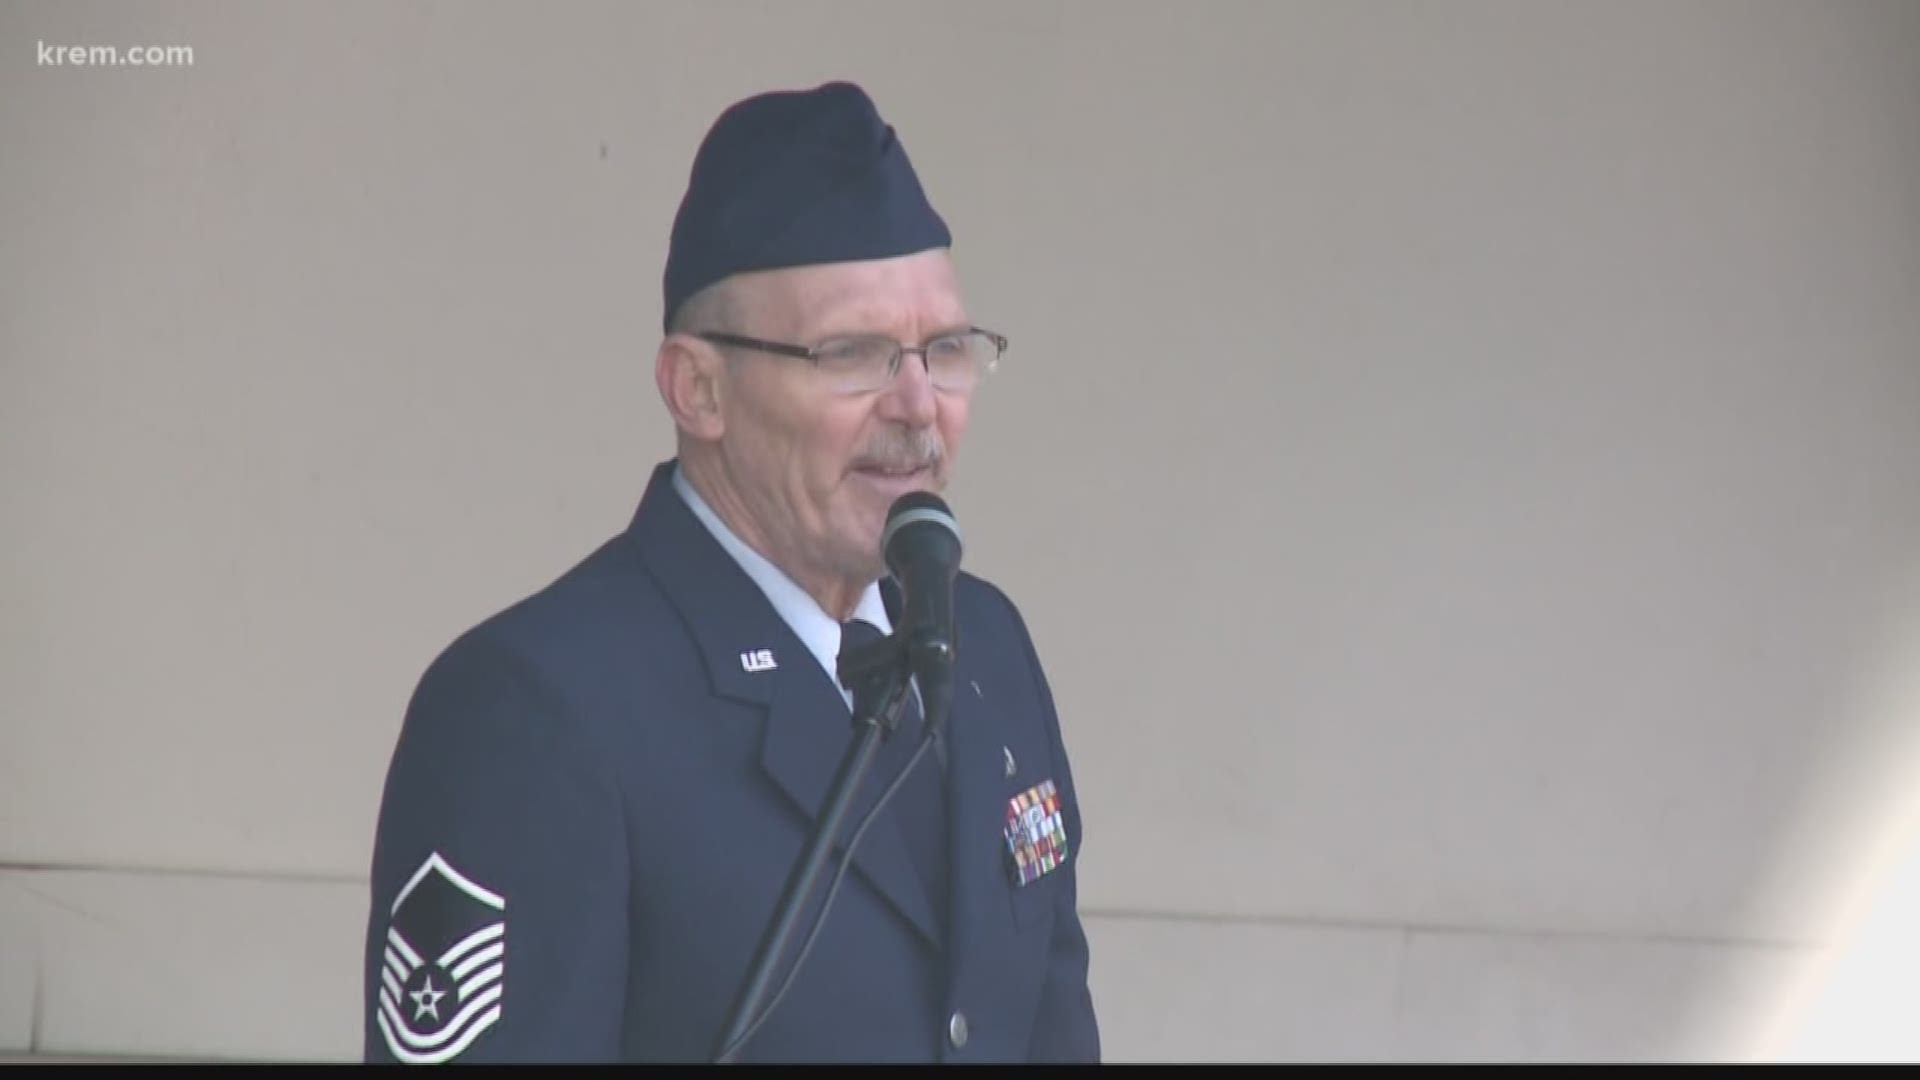 In North Idaho, the city of Hayden hosted its annual veterans day ceremony. There, they named the city's distinguished veteran of the year.